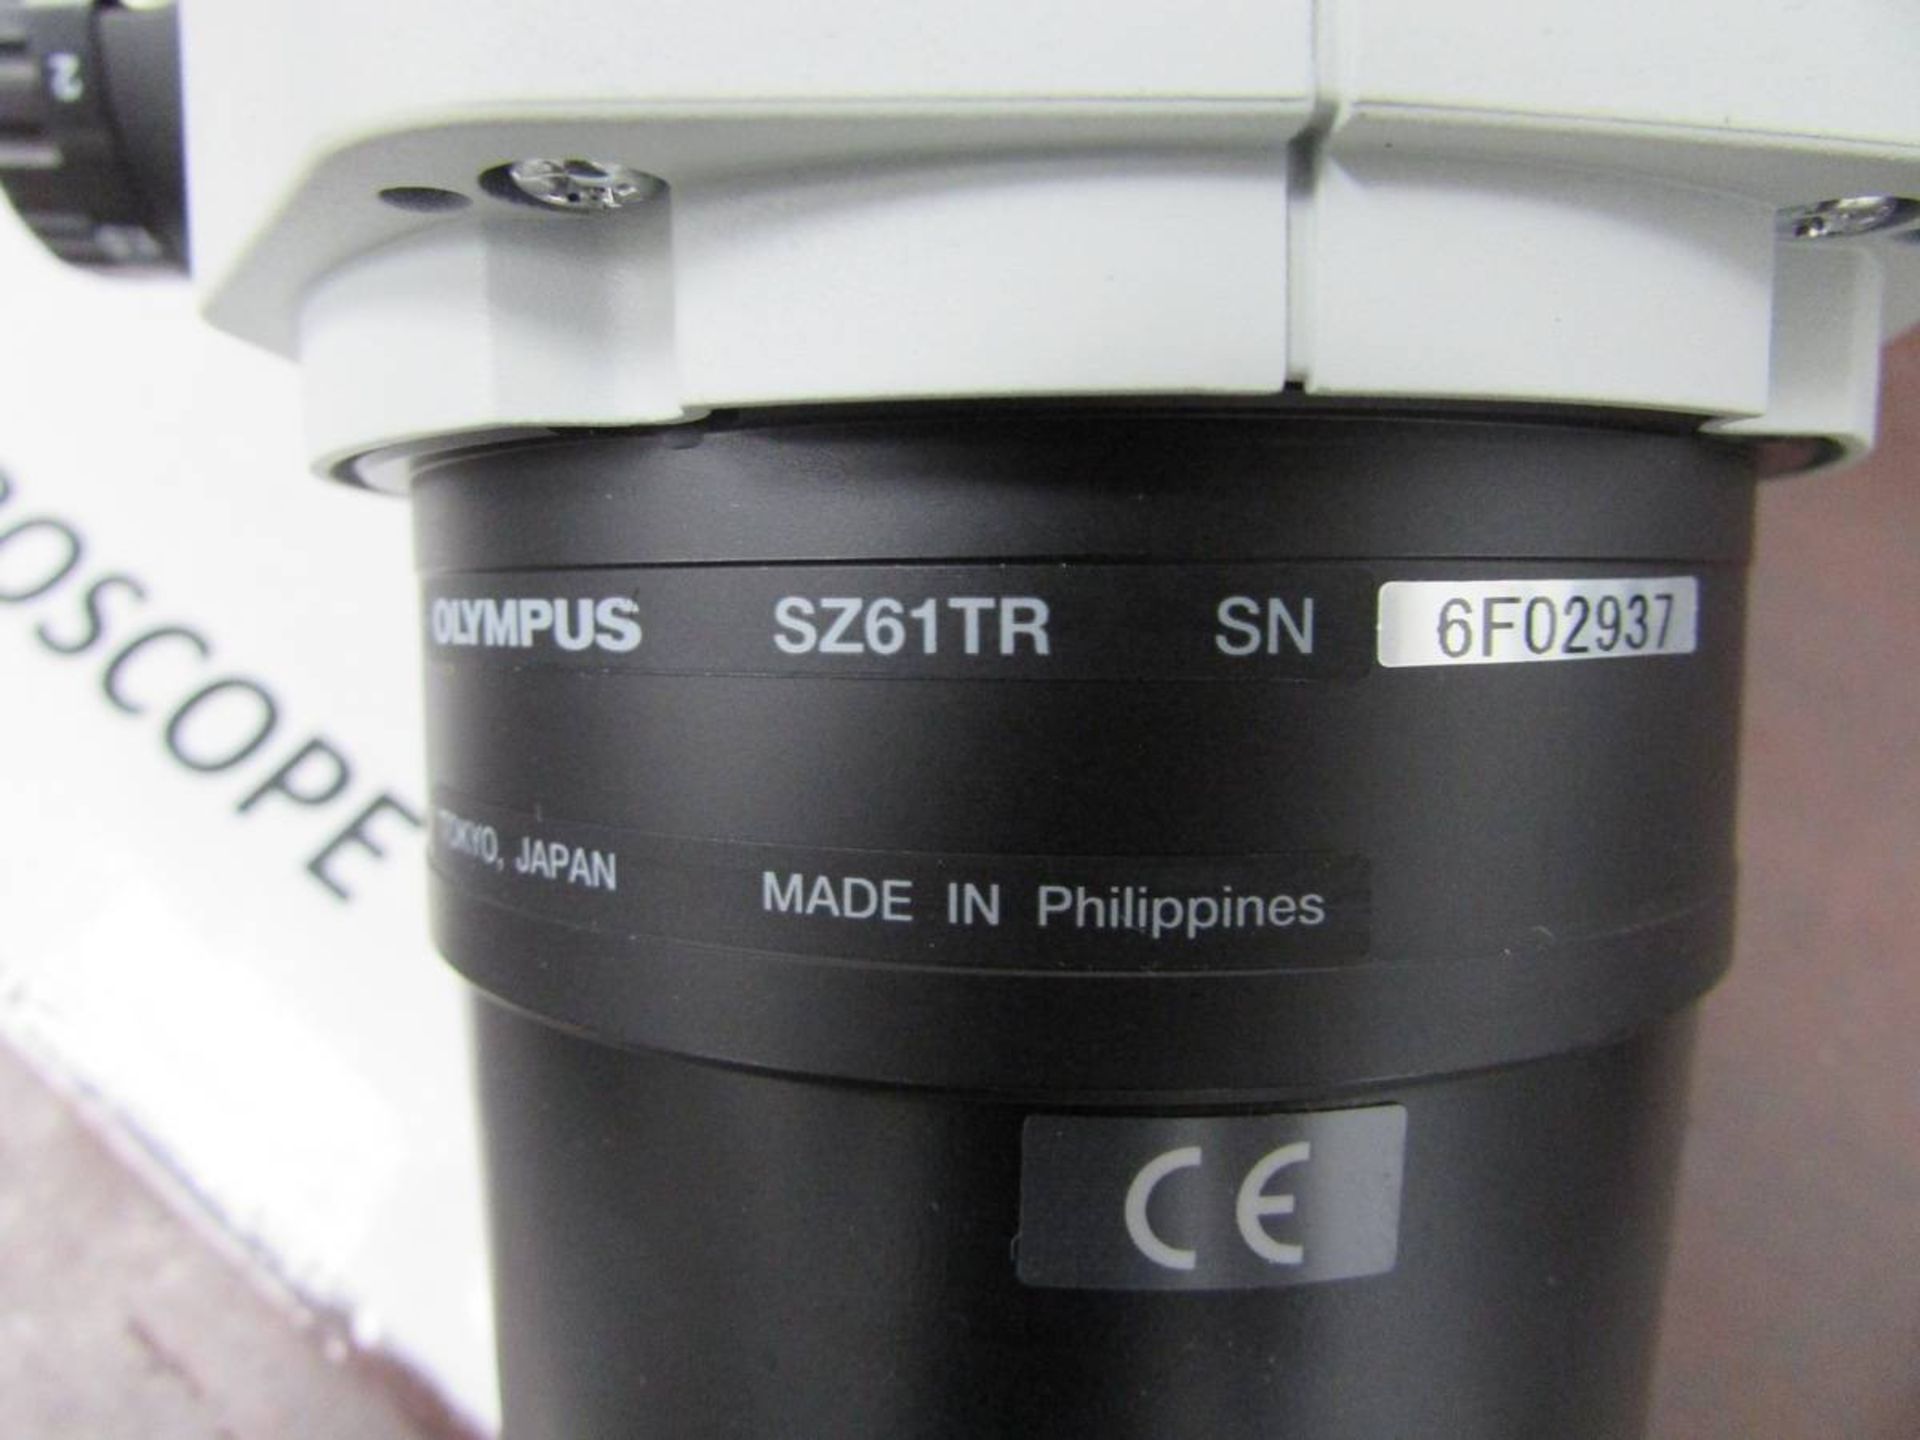 Olympus SZ61TR Stereo Zoom Microscope - Image 8 of 8